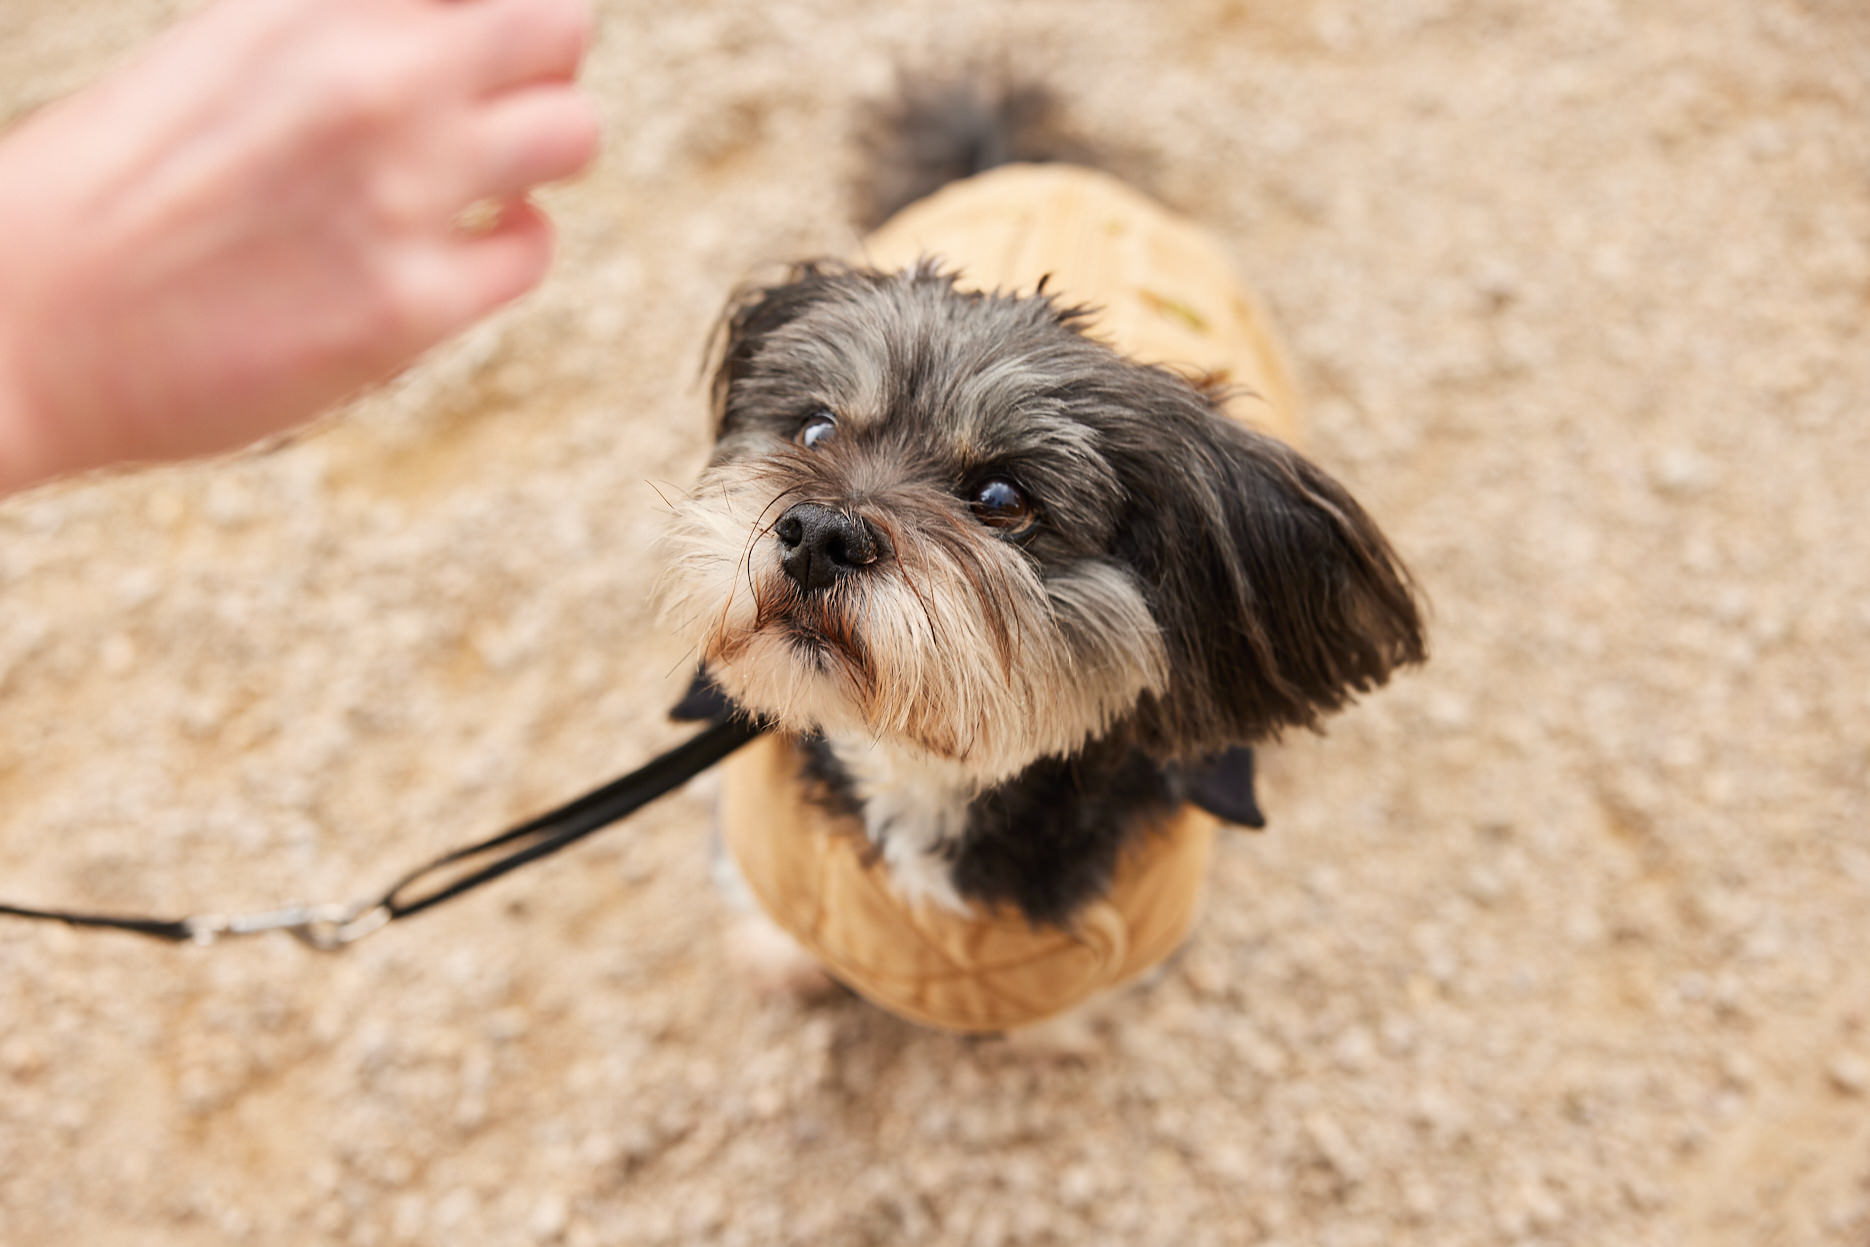 A small dog wearing a brown coat